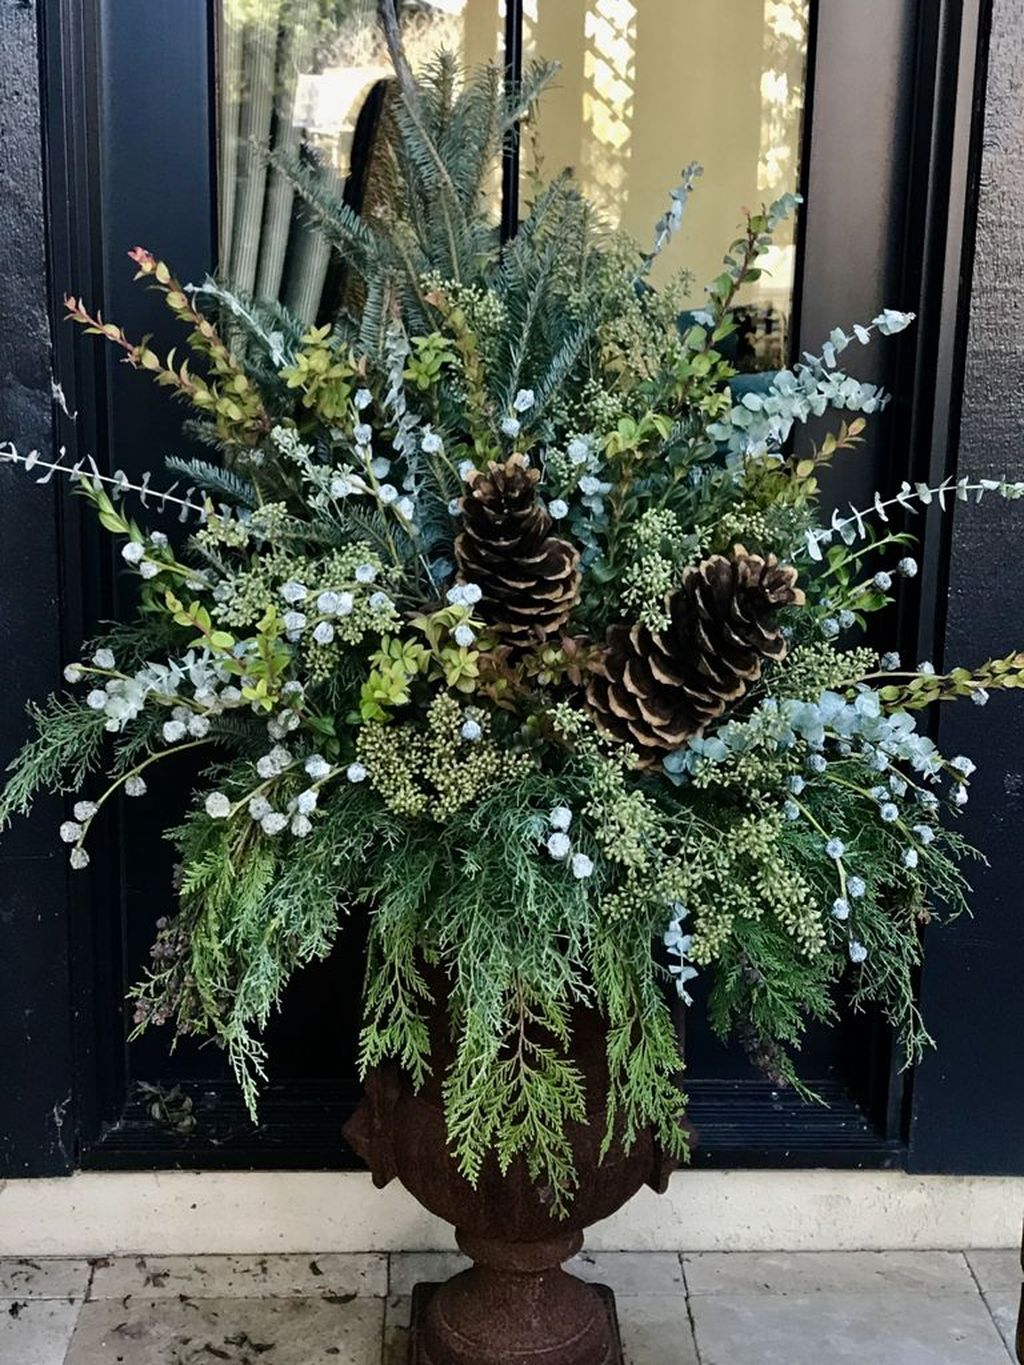 Marvelous Outdoor Holiday Planter Ideas To Beauty Porch Décor 33